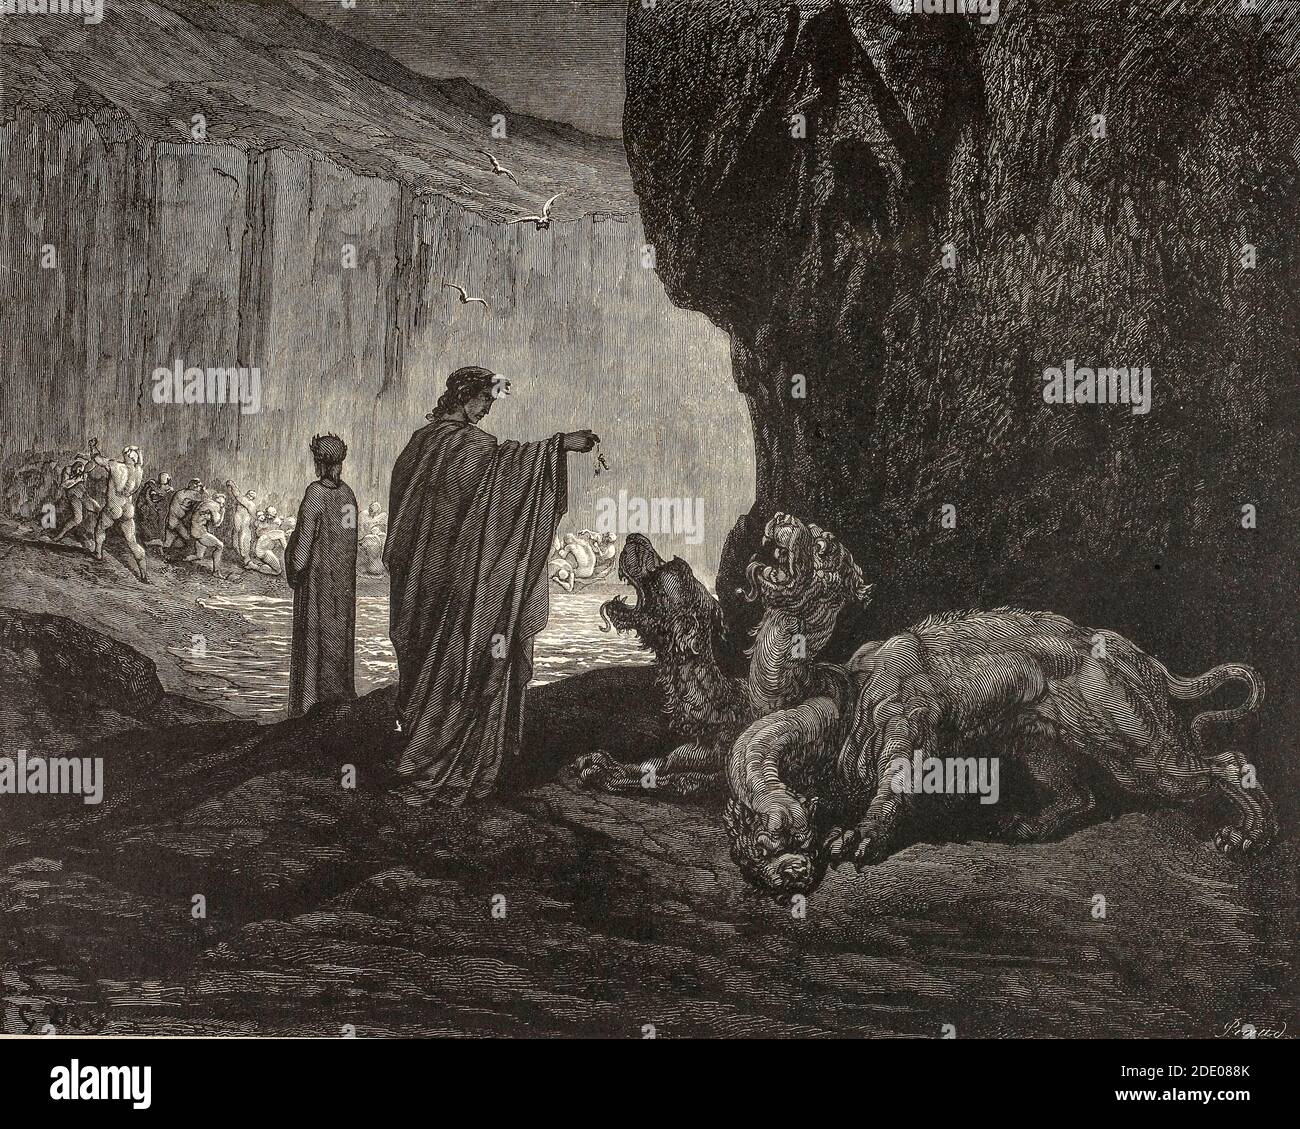 Dante Divina Commedia - Hell -Dante meets Cerberus, a character from Greek mythology, one of the monsters guarding the entrance to the underworld over which the god Hades reigned  - Canto VI - illustration by Gustave Dorè Stock Photo